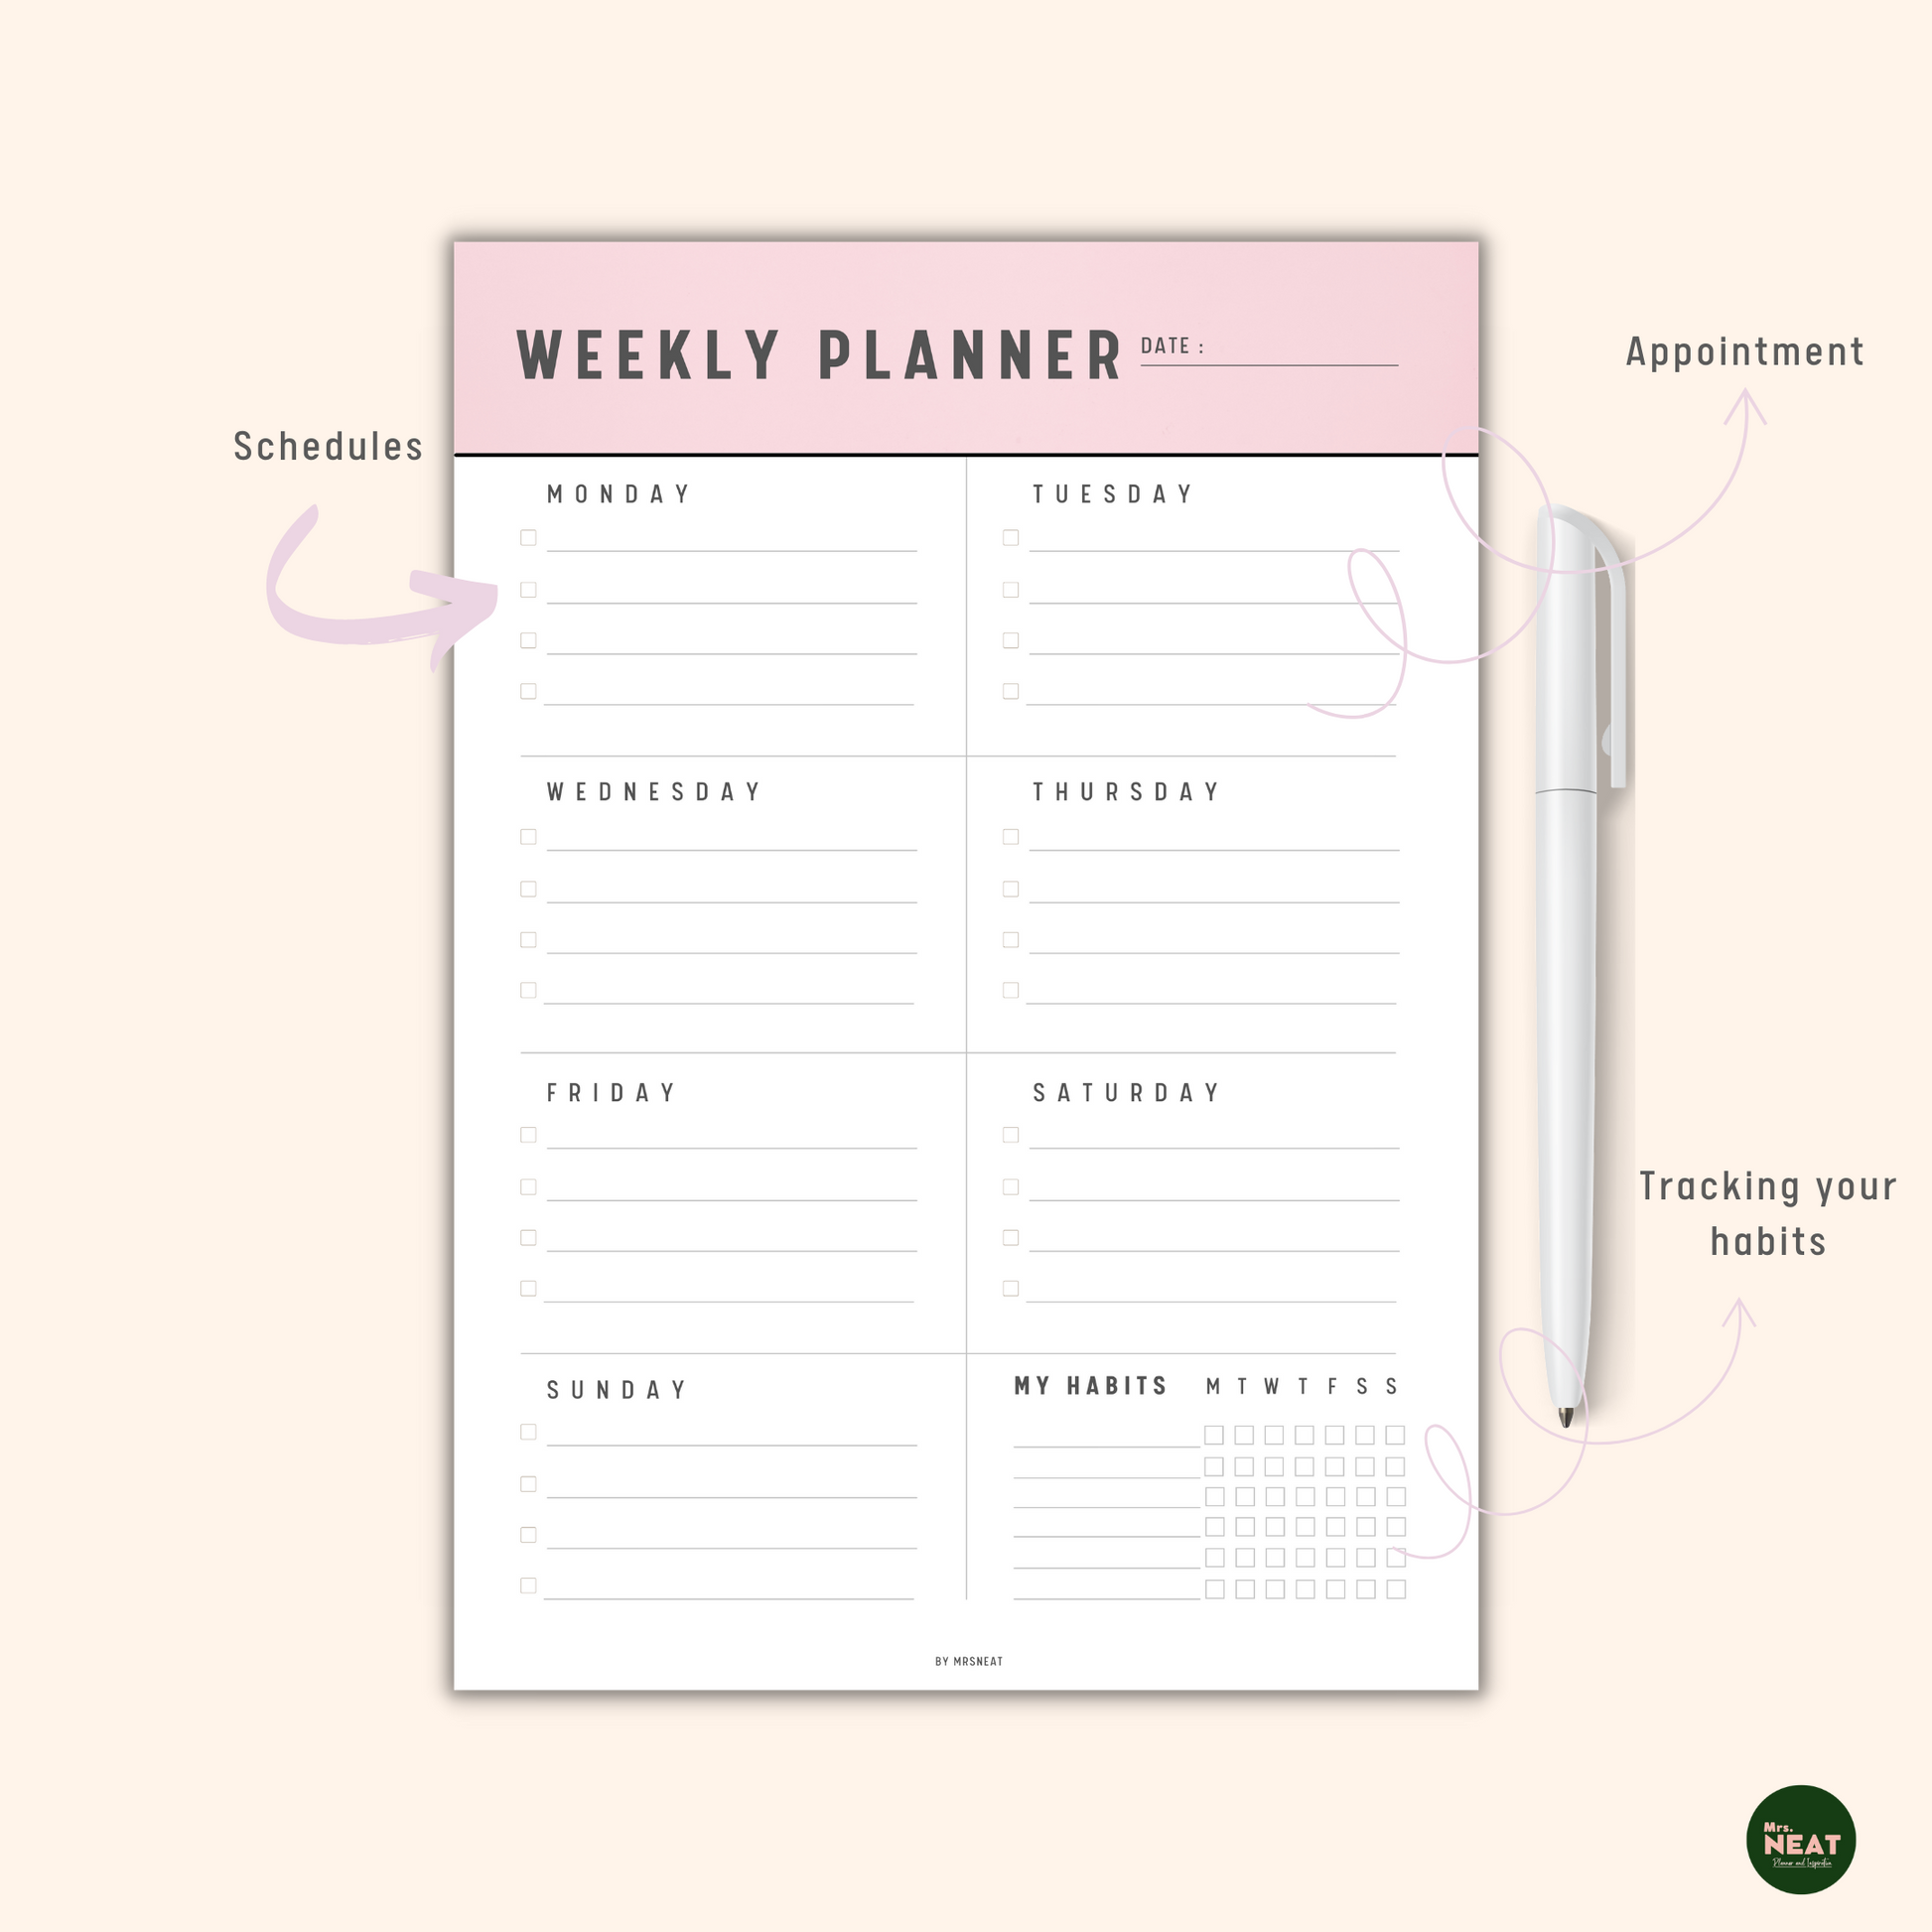 Cute and Minimalist Pink Weekly Planner with room for Appointment, Schedules, and Habit Tracker